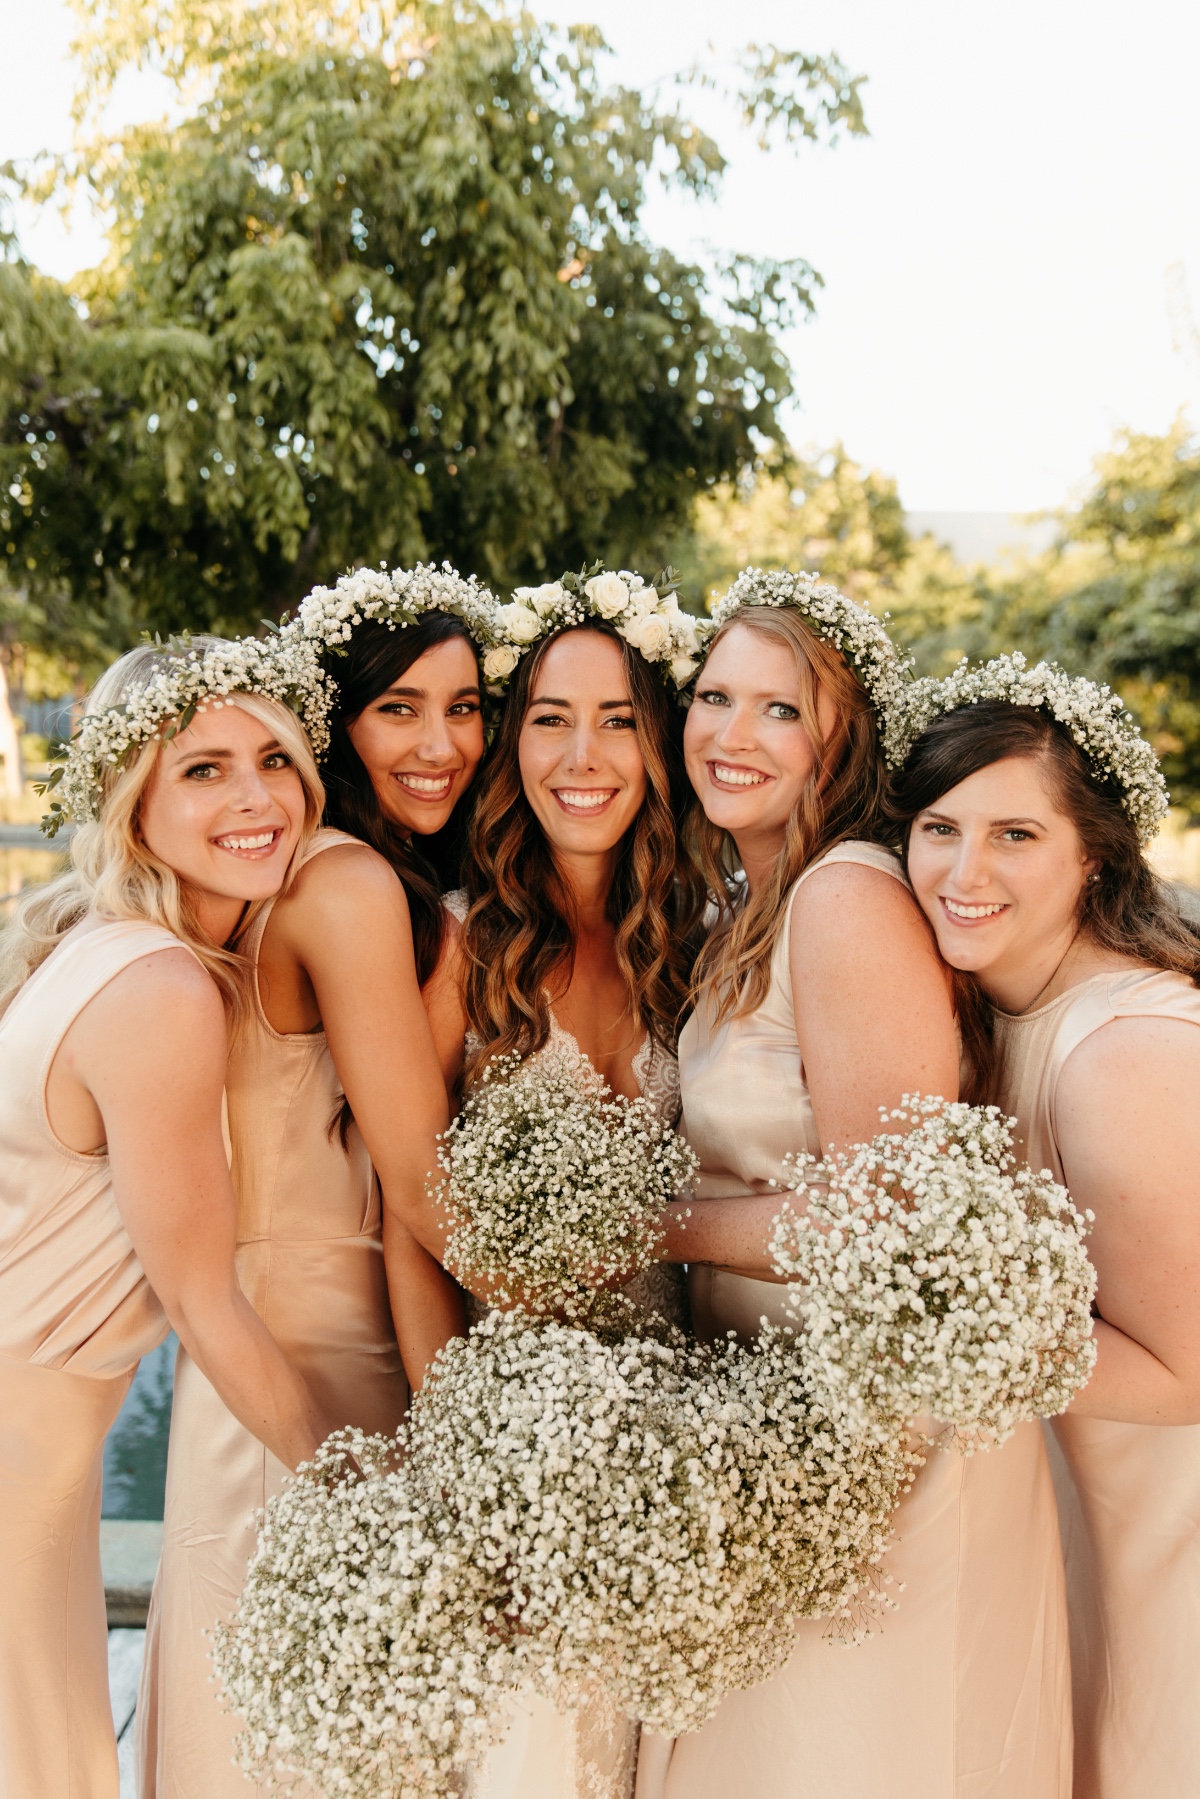 Baby's Breath Bouquets and Baby's Breath Flower Crowns